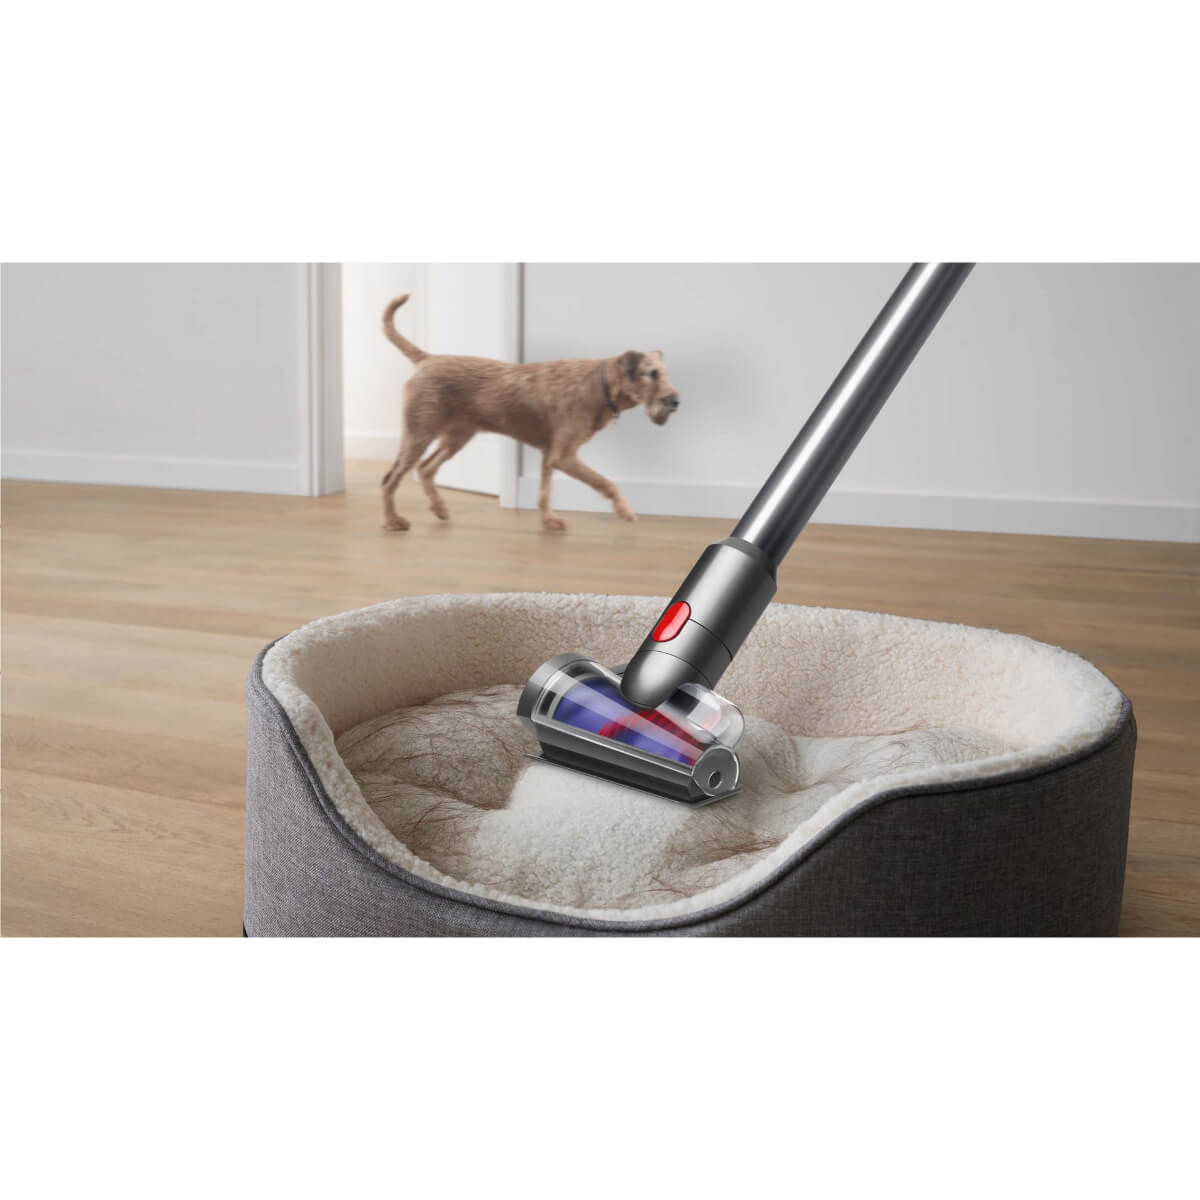 V8 Absolute New Cordless Vacuum Cleaner